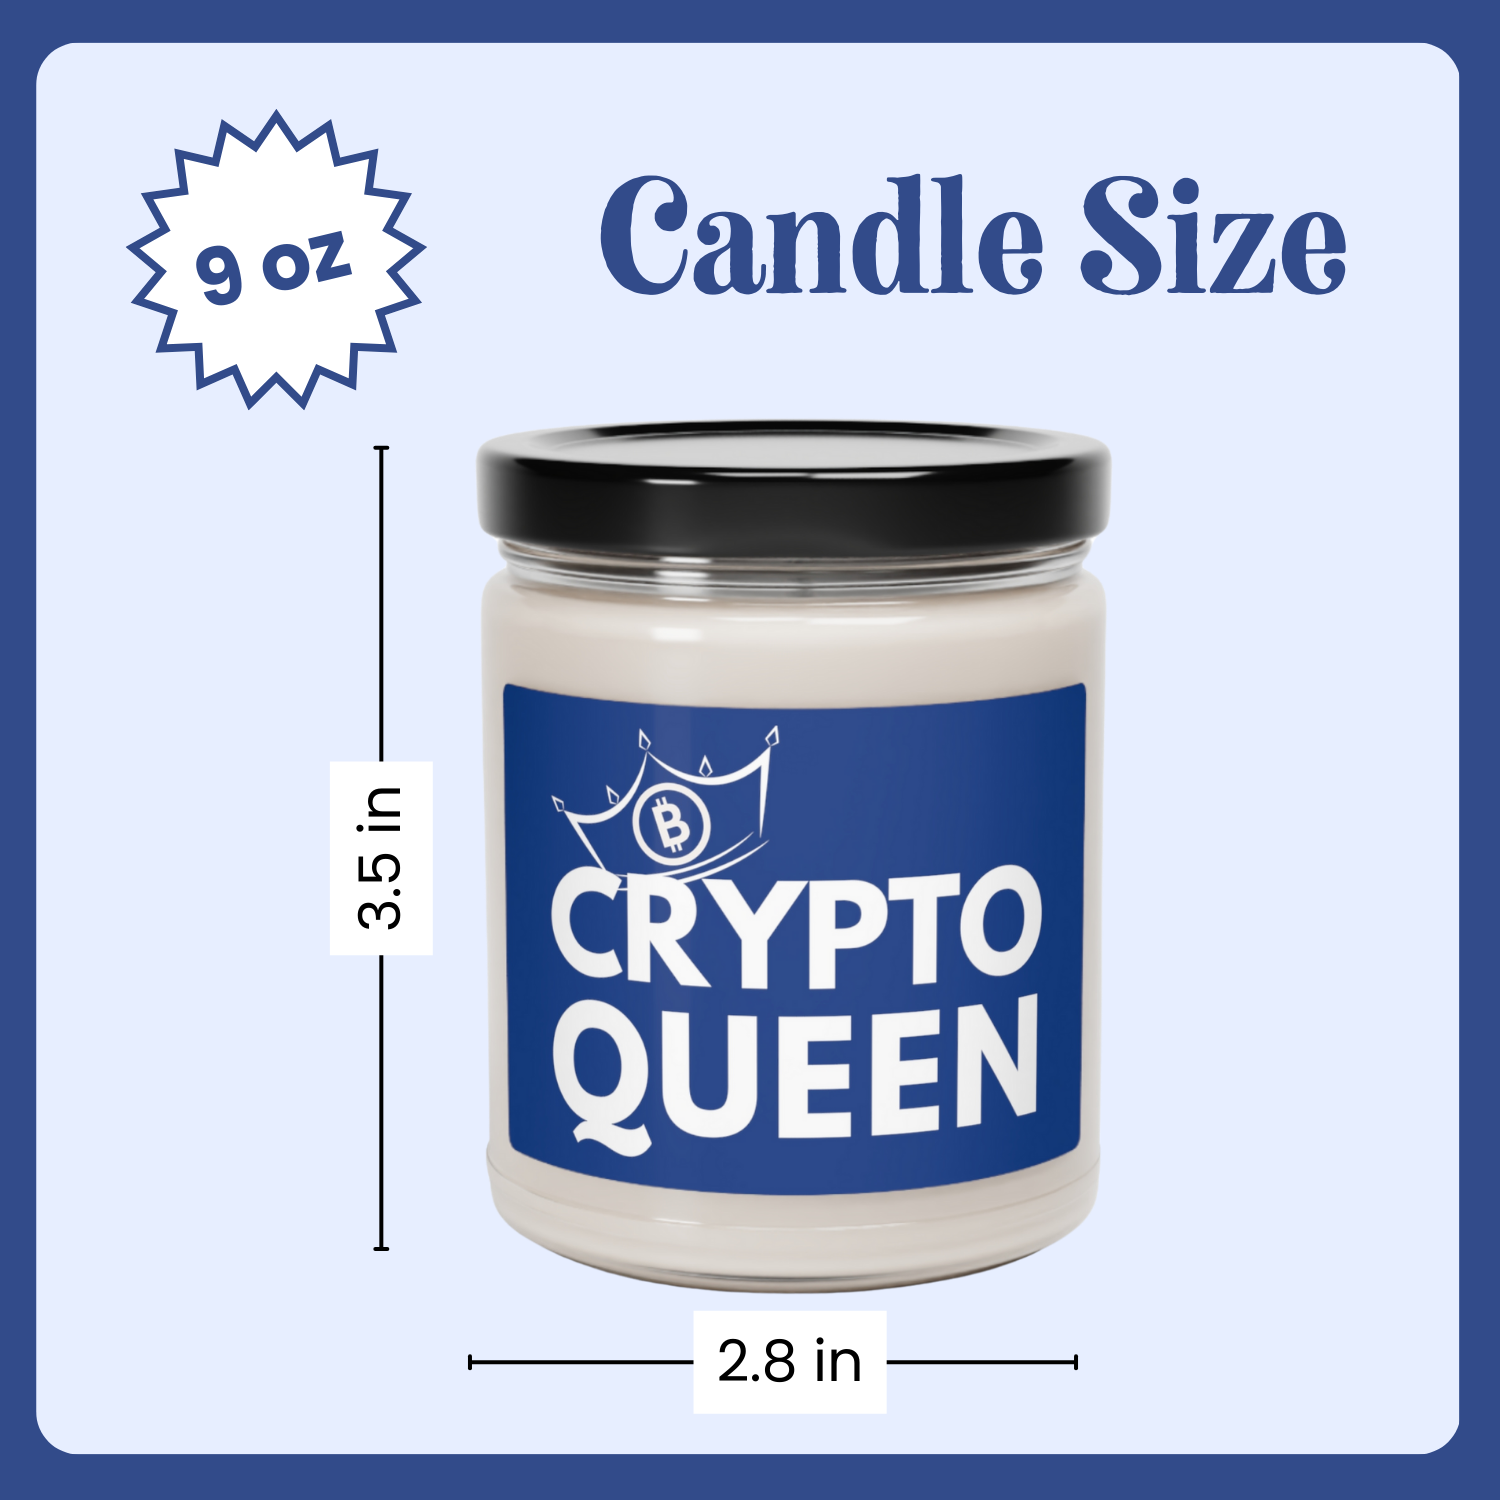 Crypto Queen candle, 9 oz glass jar.